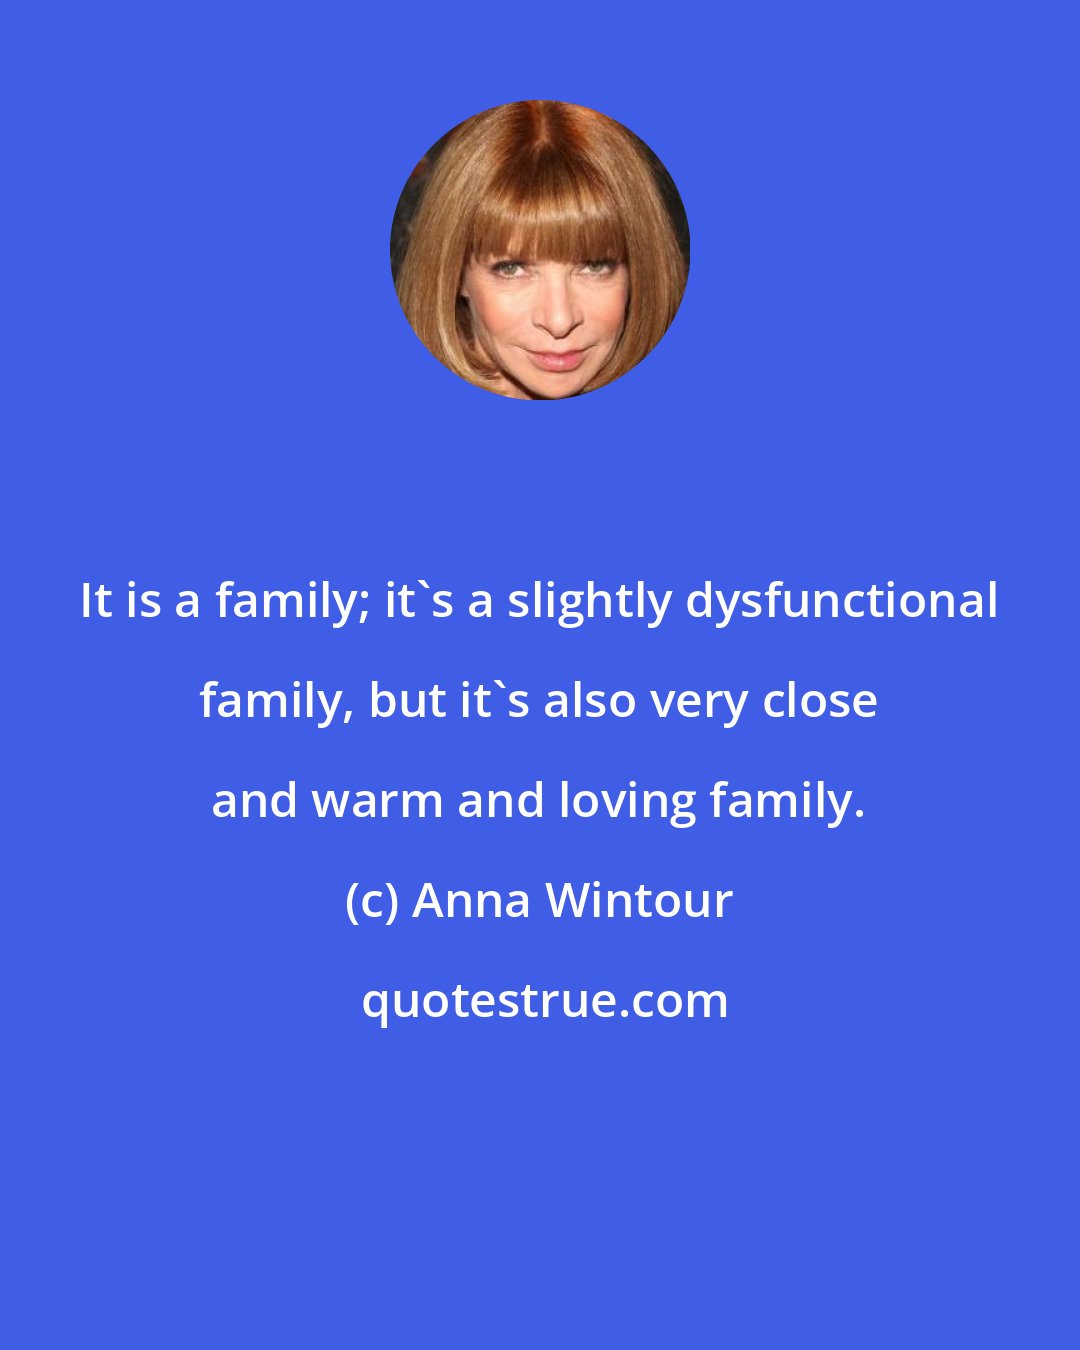 Anna Wintour: It is a family; it's a slightly dysfunctional family, but it's also very close and warm and loving family.